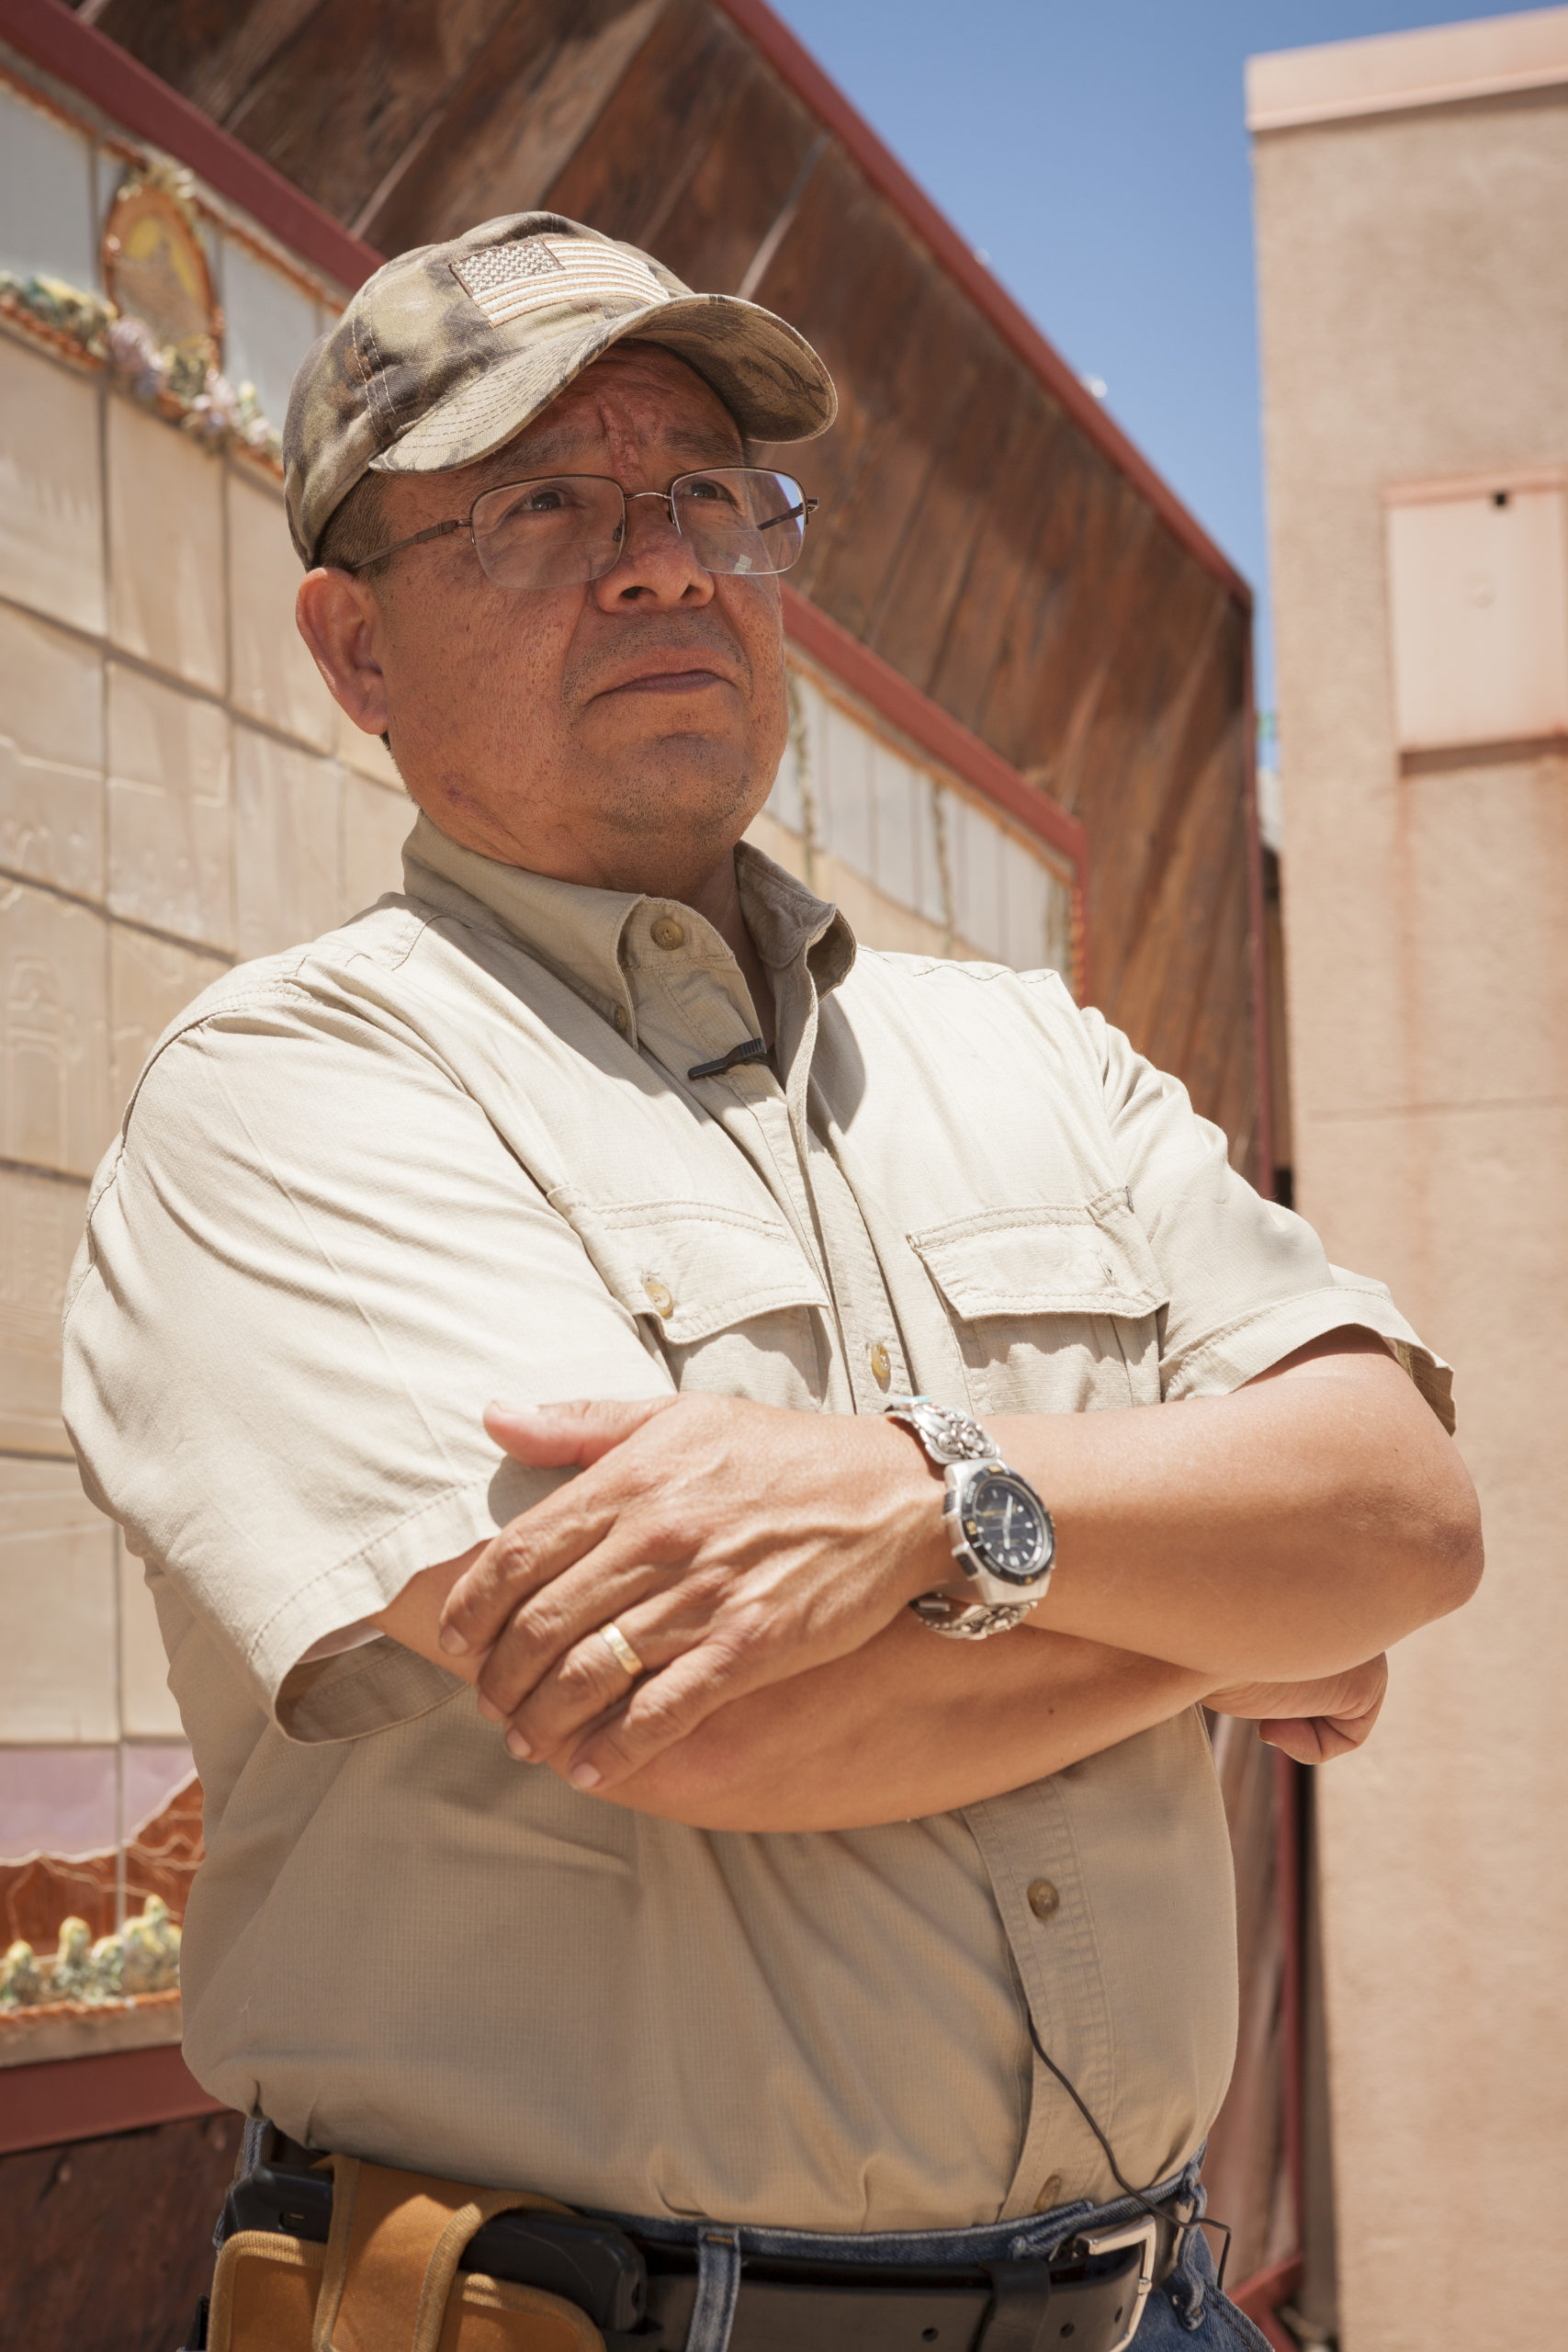 Emerson Toledo seen from the waist up, arms folded looking to the left, wearing a light brown khaki shirt, glasses and camouflage baseball cap.